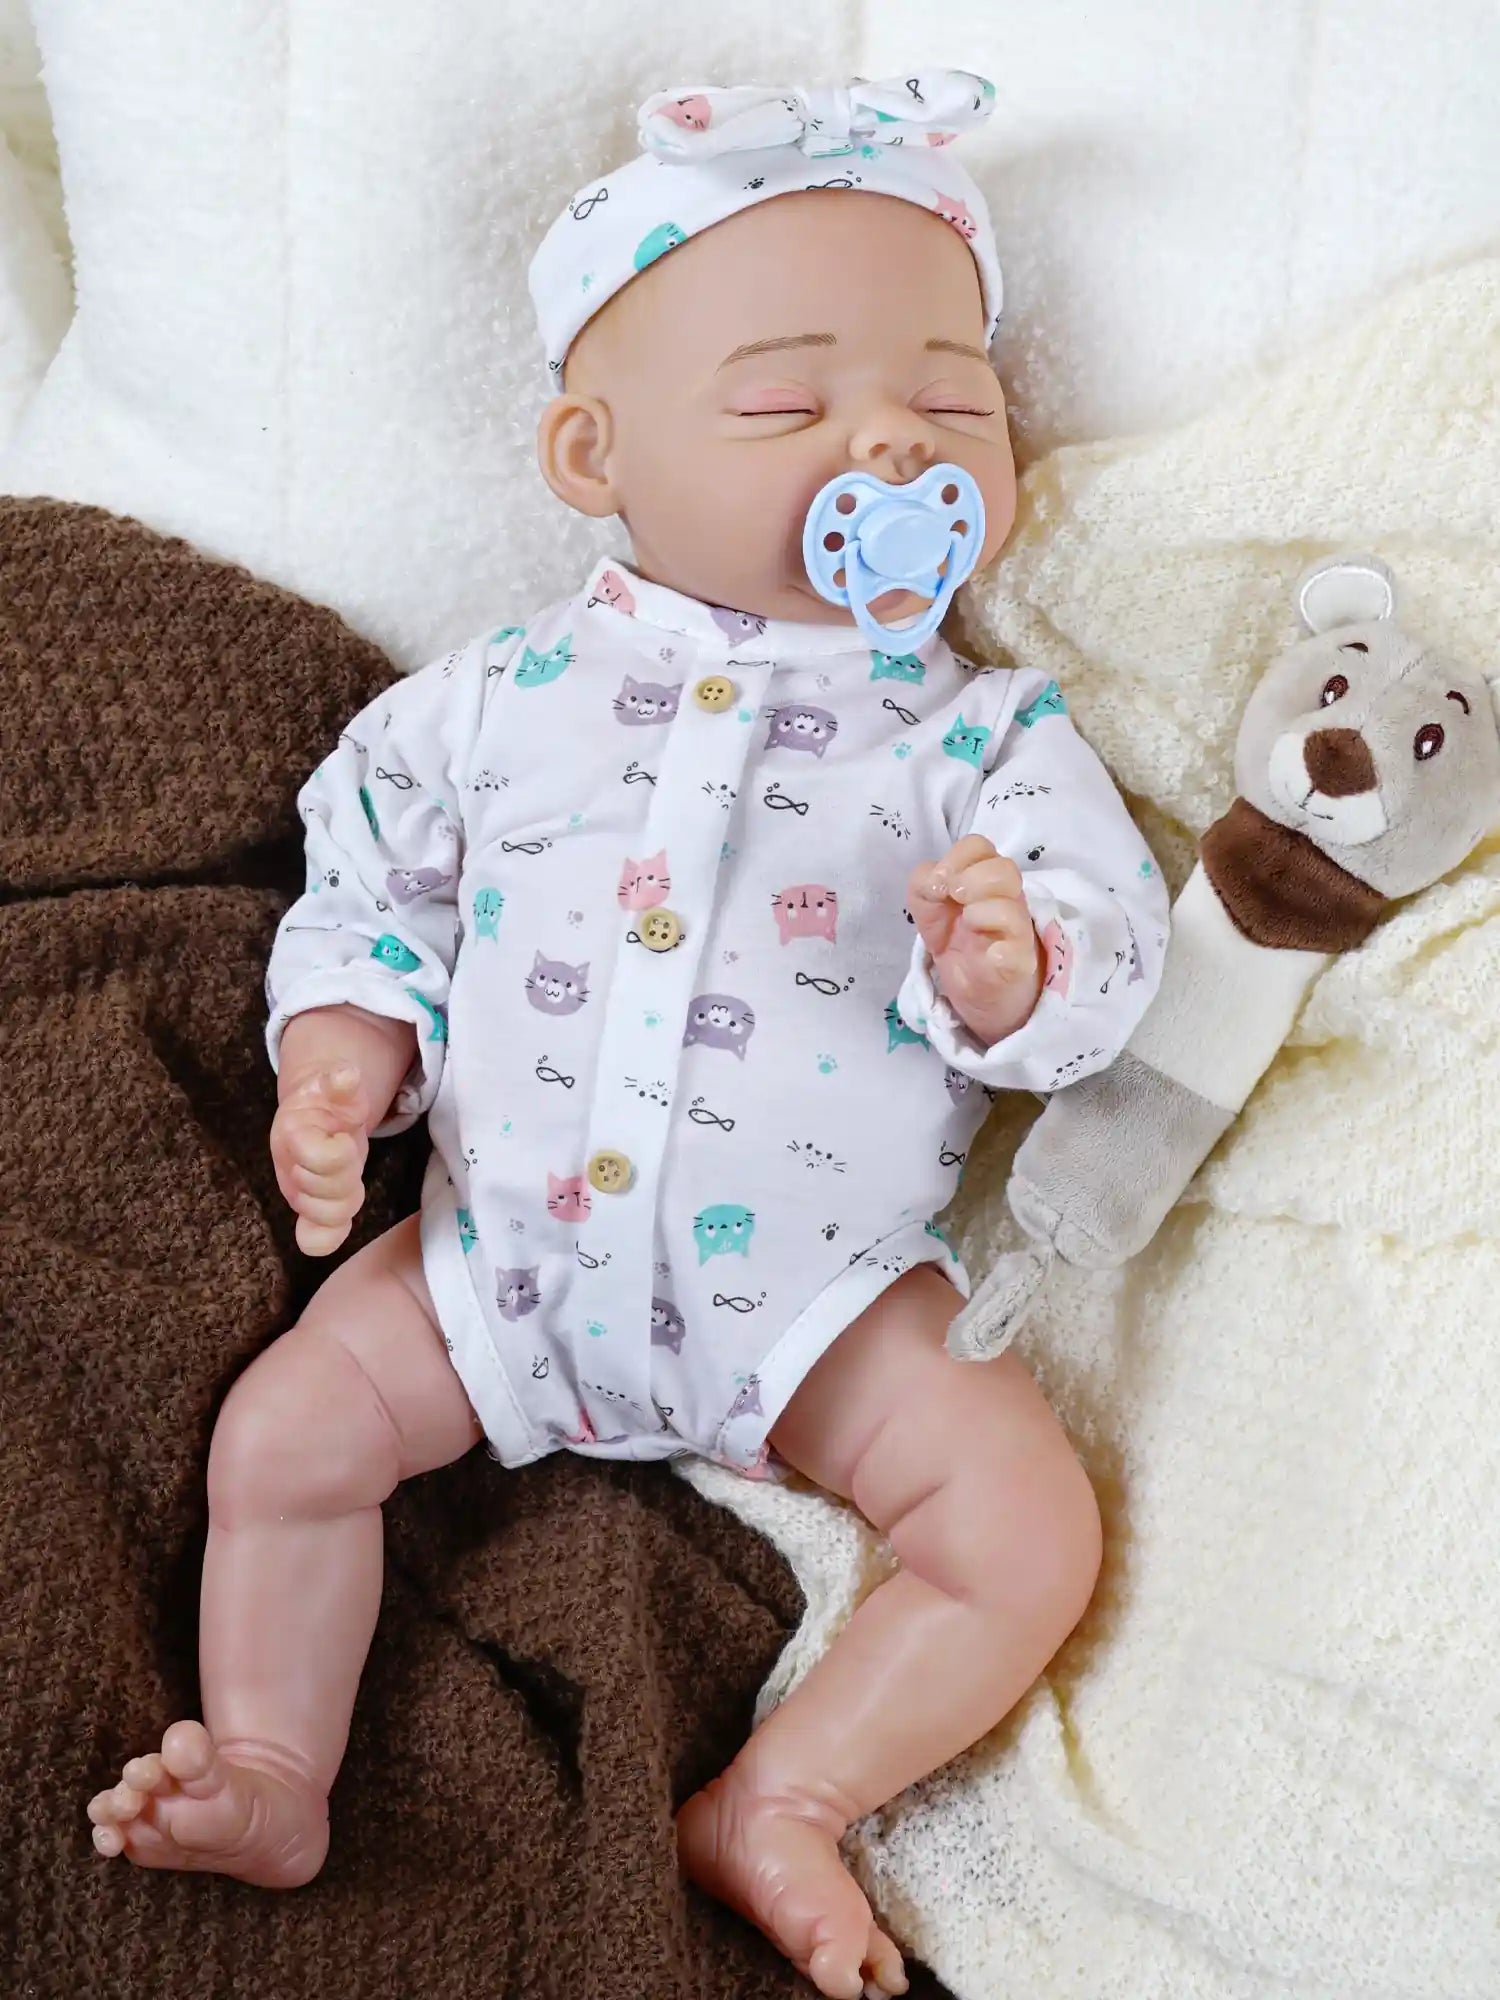 A sleeping reborn baby doll dressed in a white onesie with colorful cat prints, complete with a matching headband and a blue pacifier.